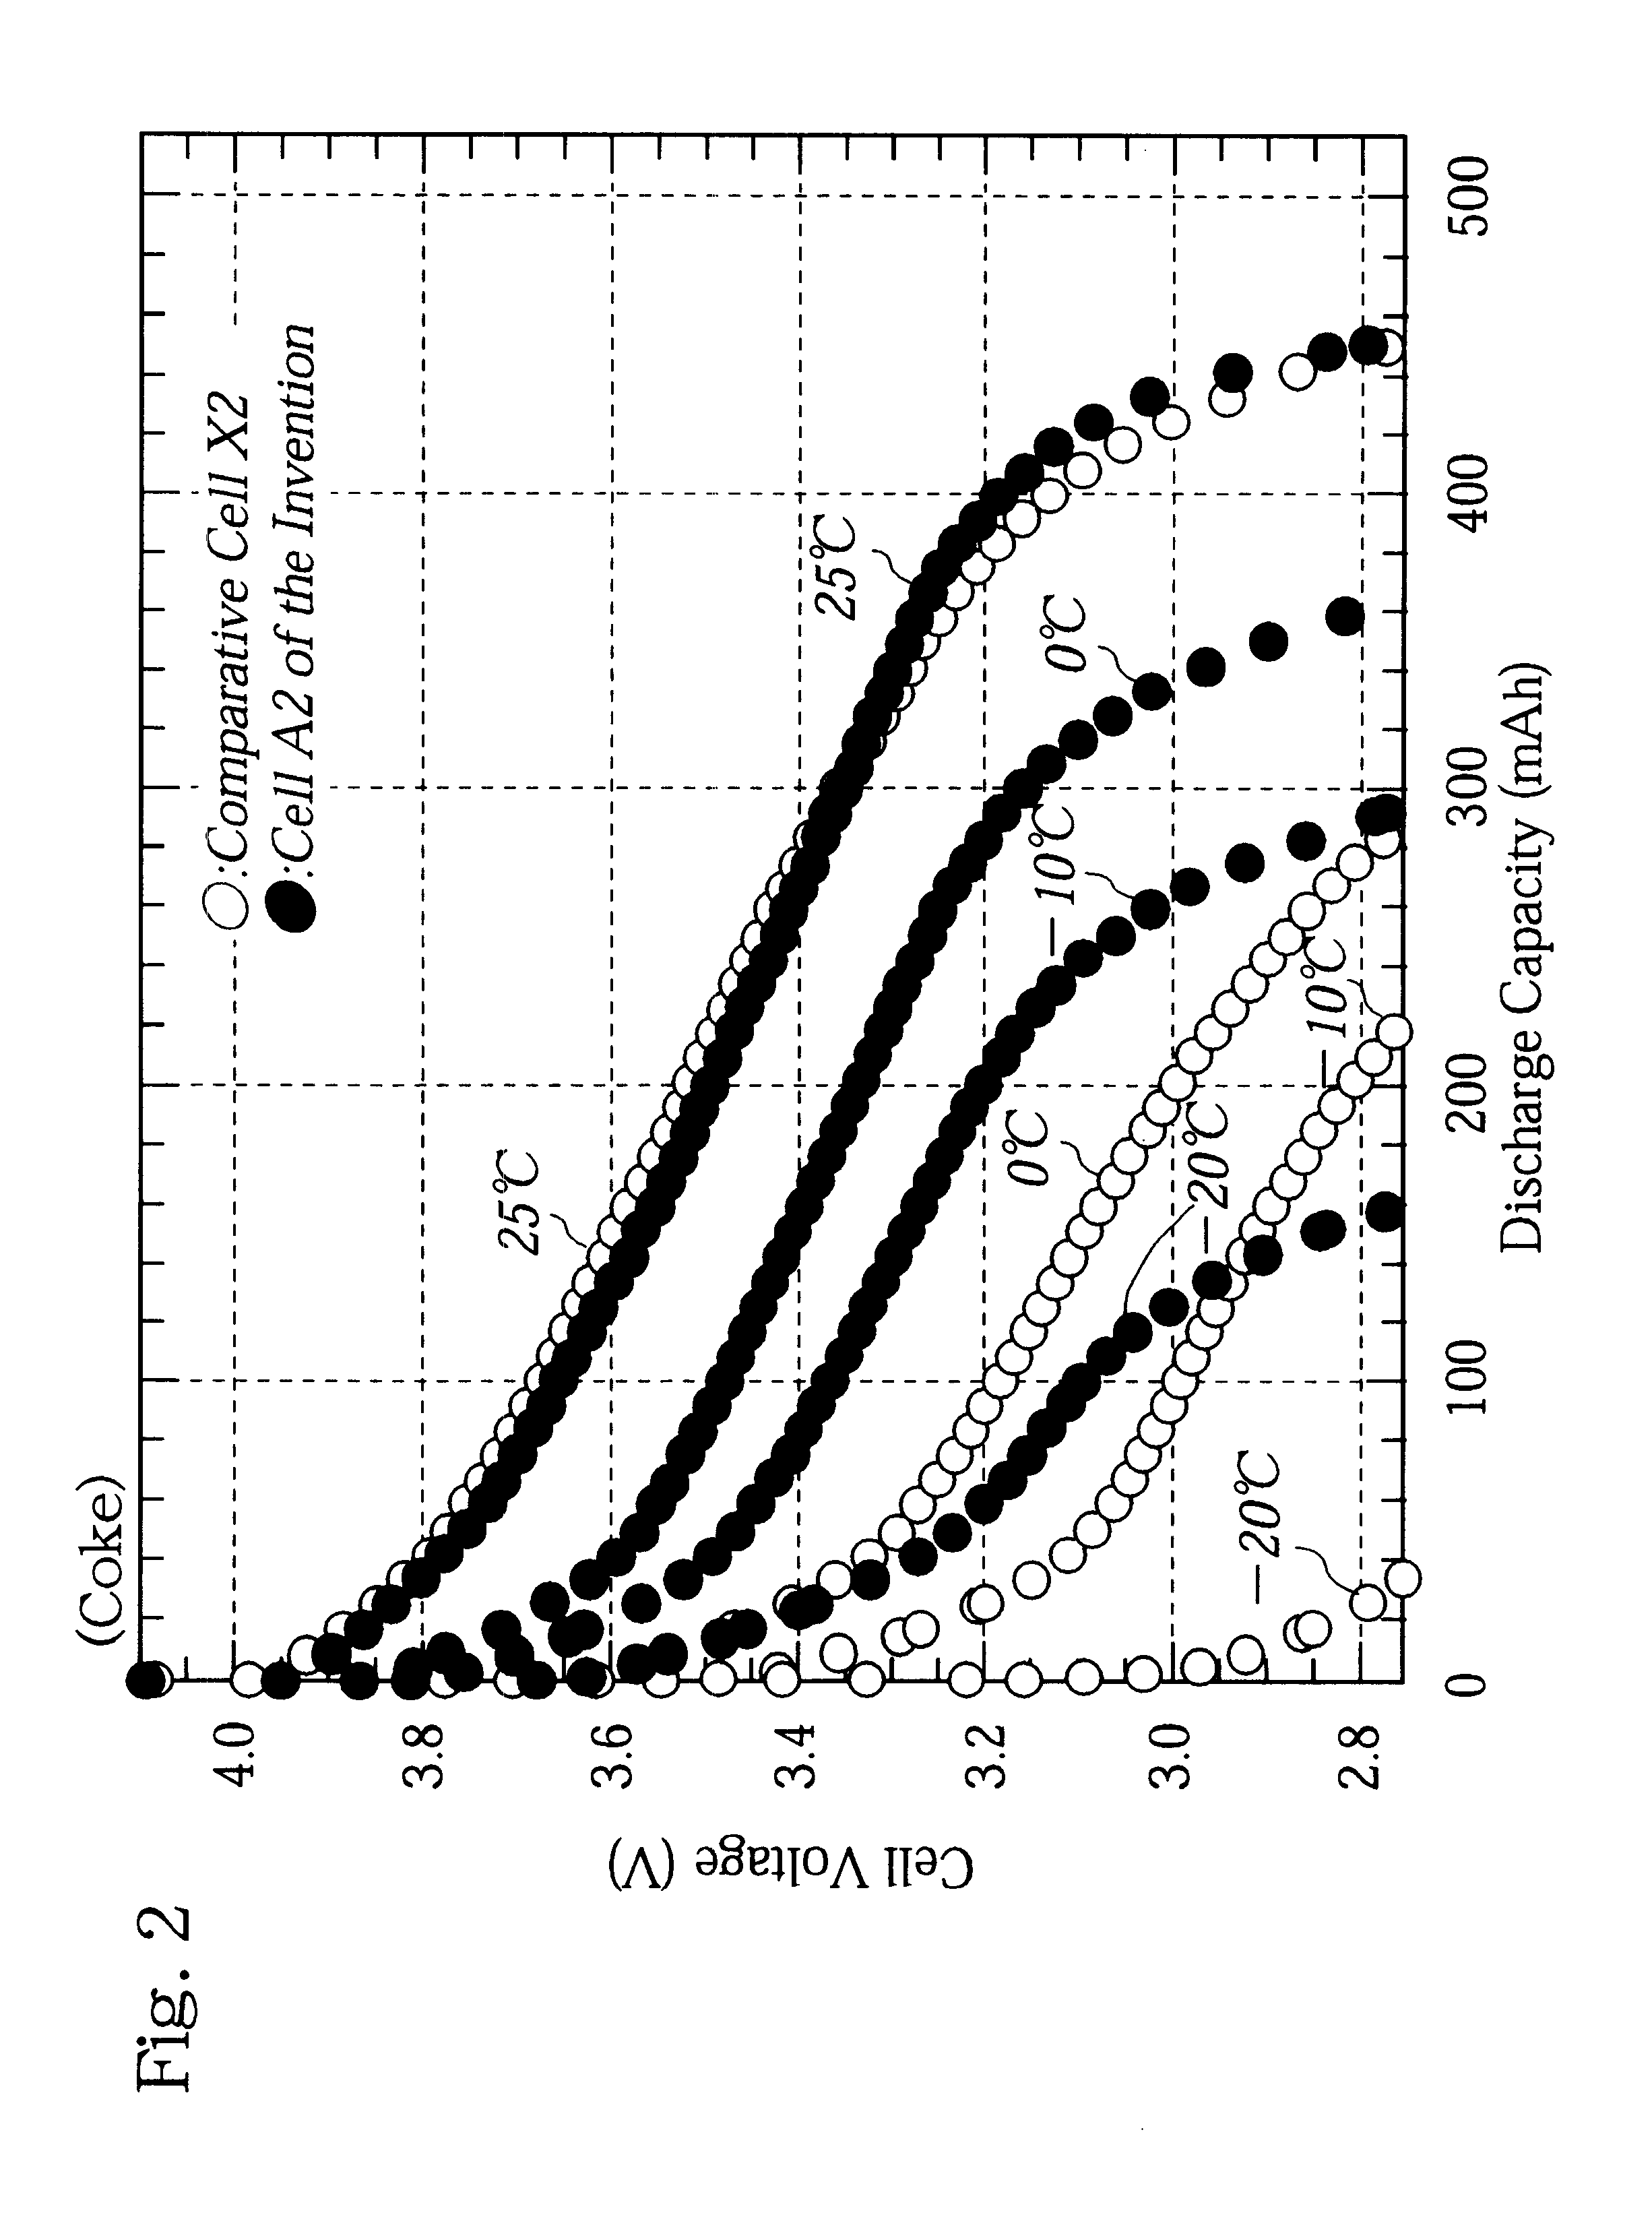 Non-aqueous electrolyte cell having a positive electrode with Ti-attached LiCoO2